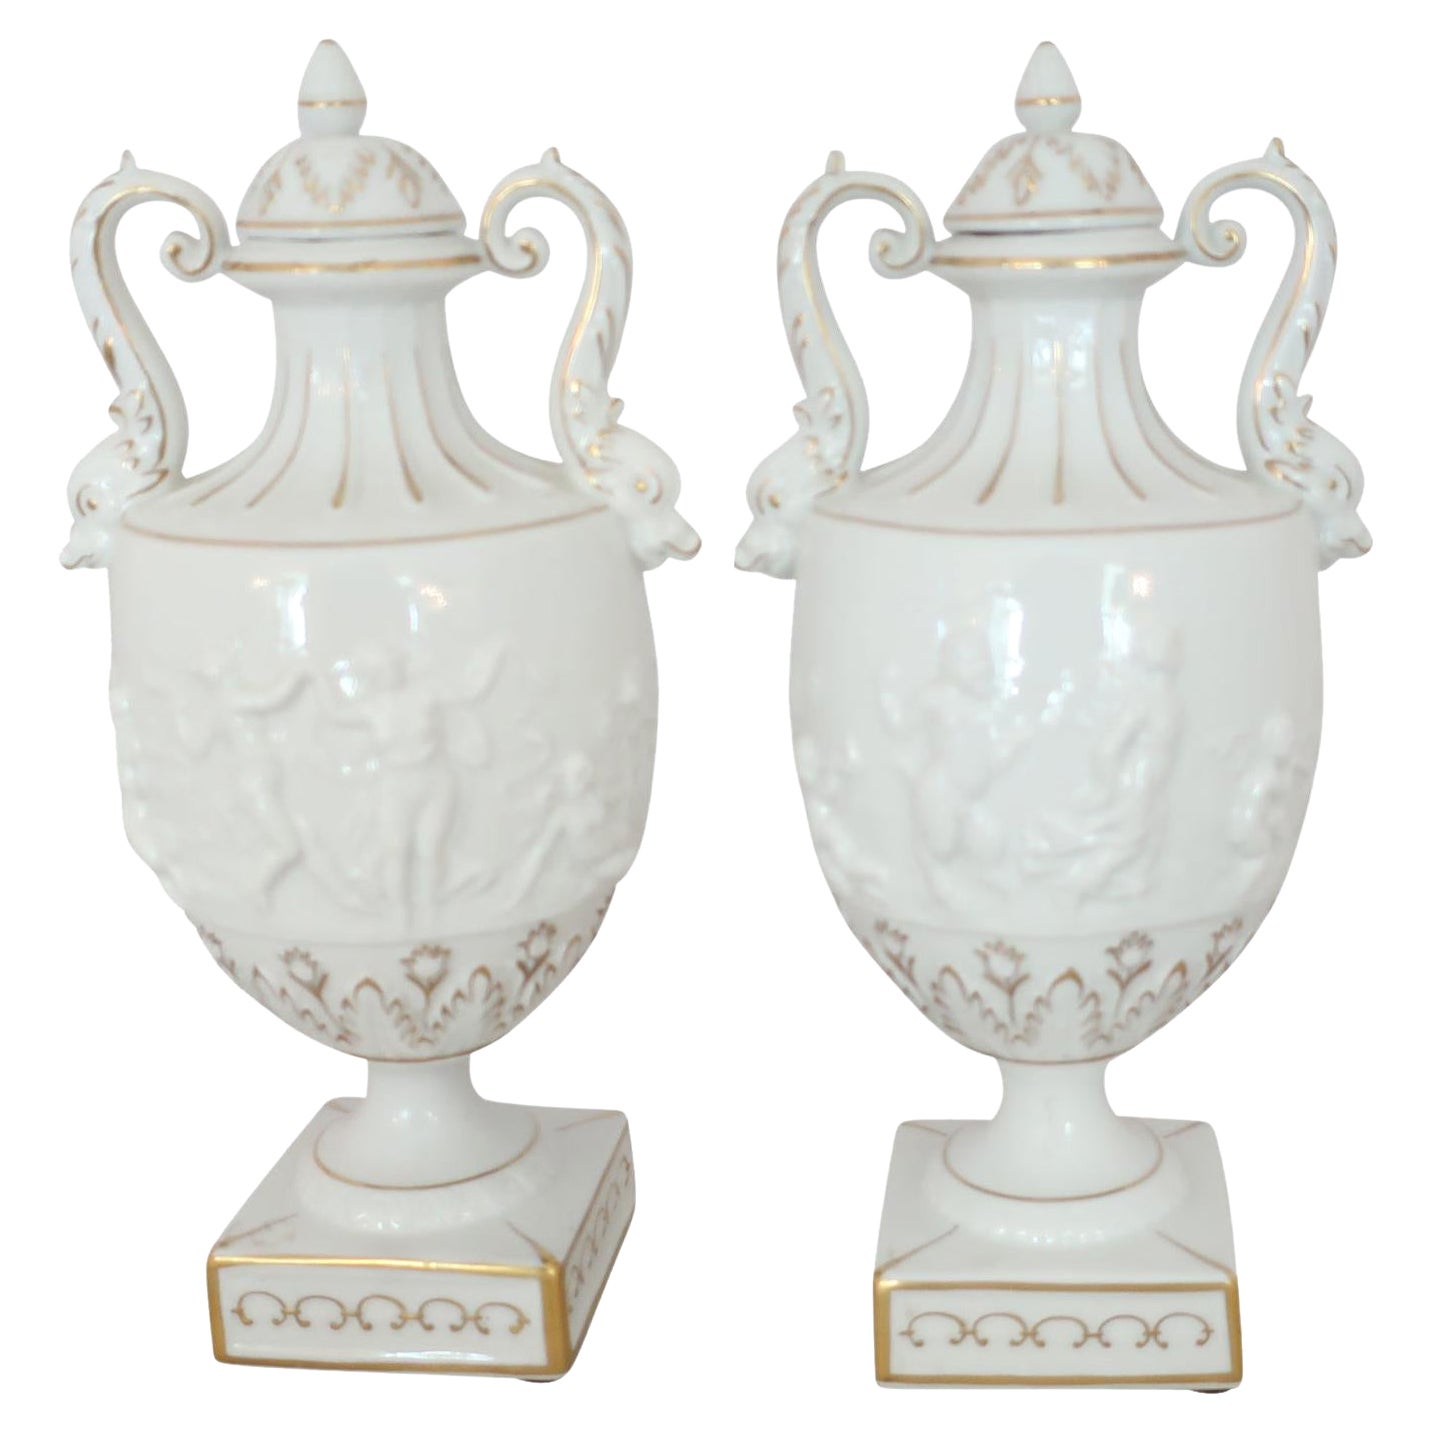 White and Gilt Capodimonte Porcelain Urns with Lids and Putti Decoration